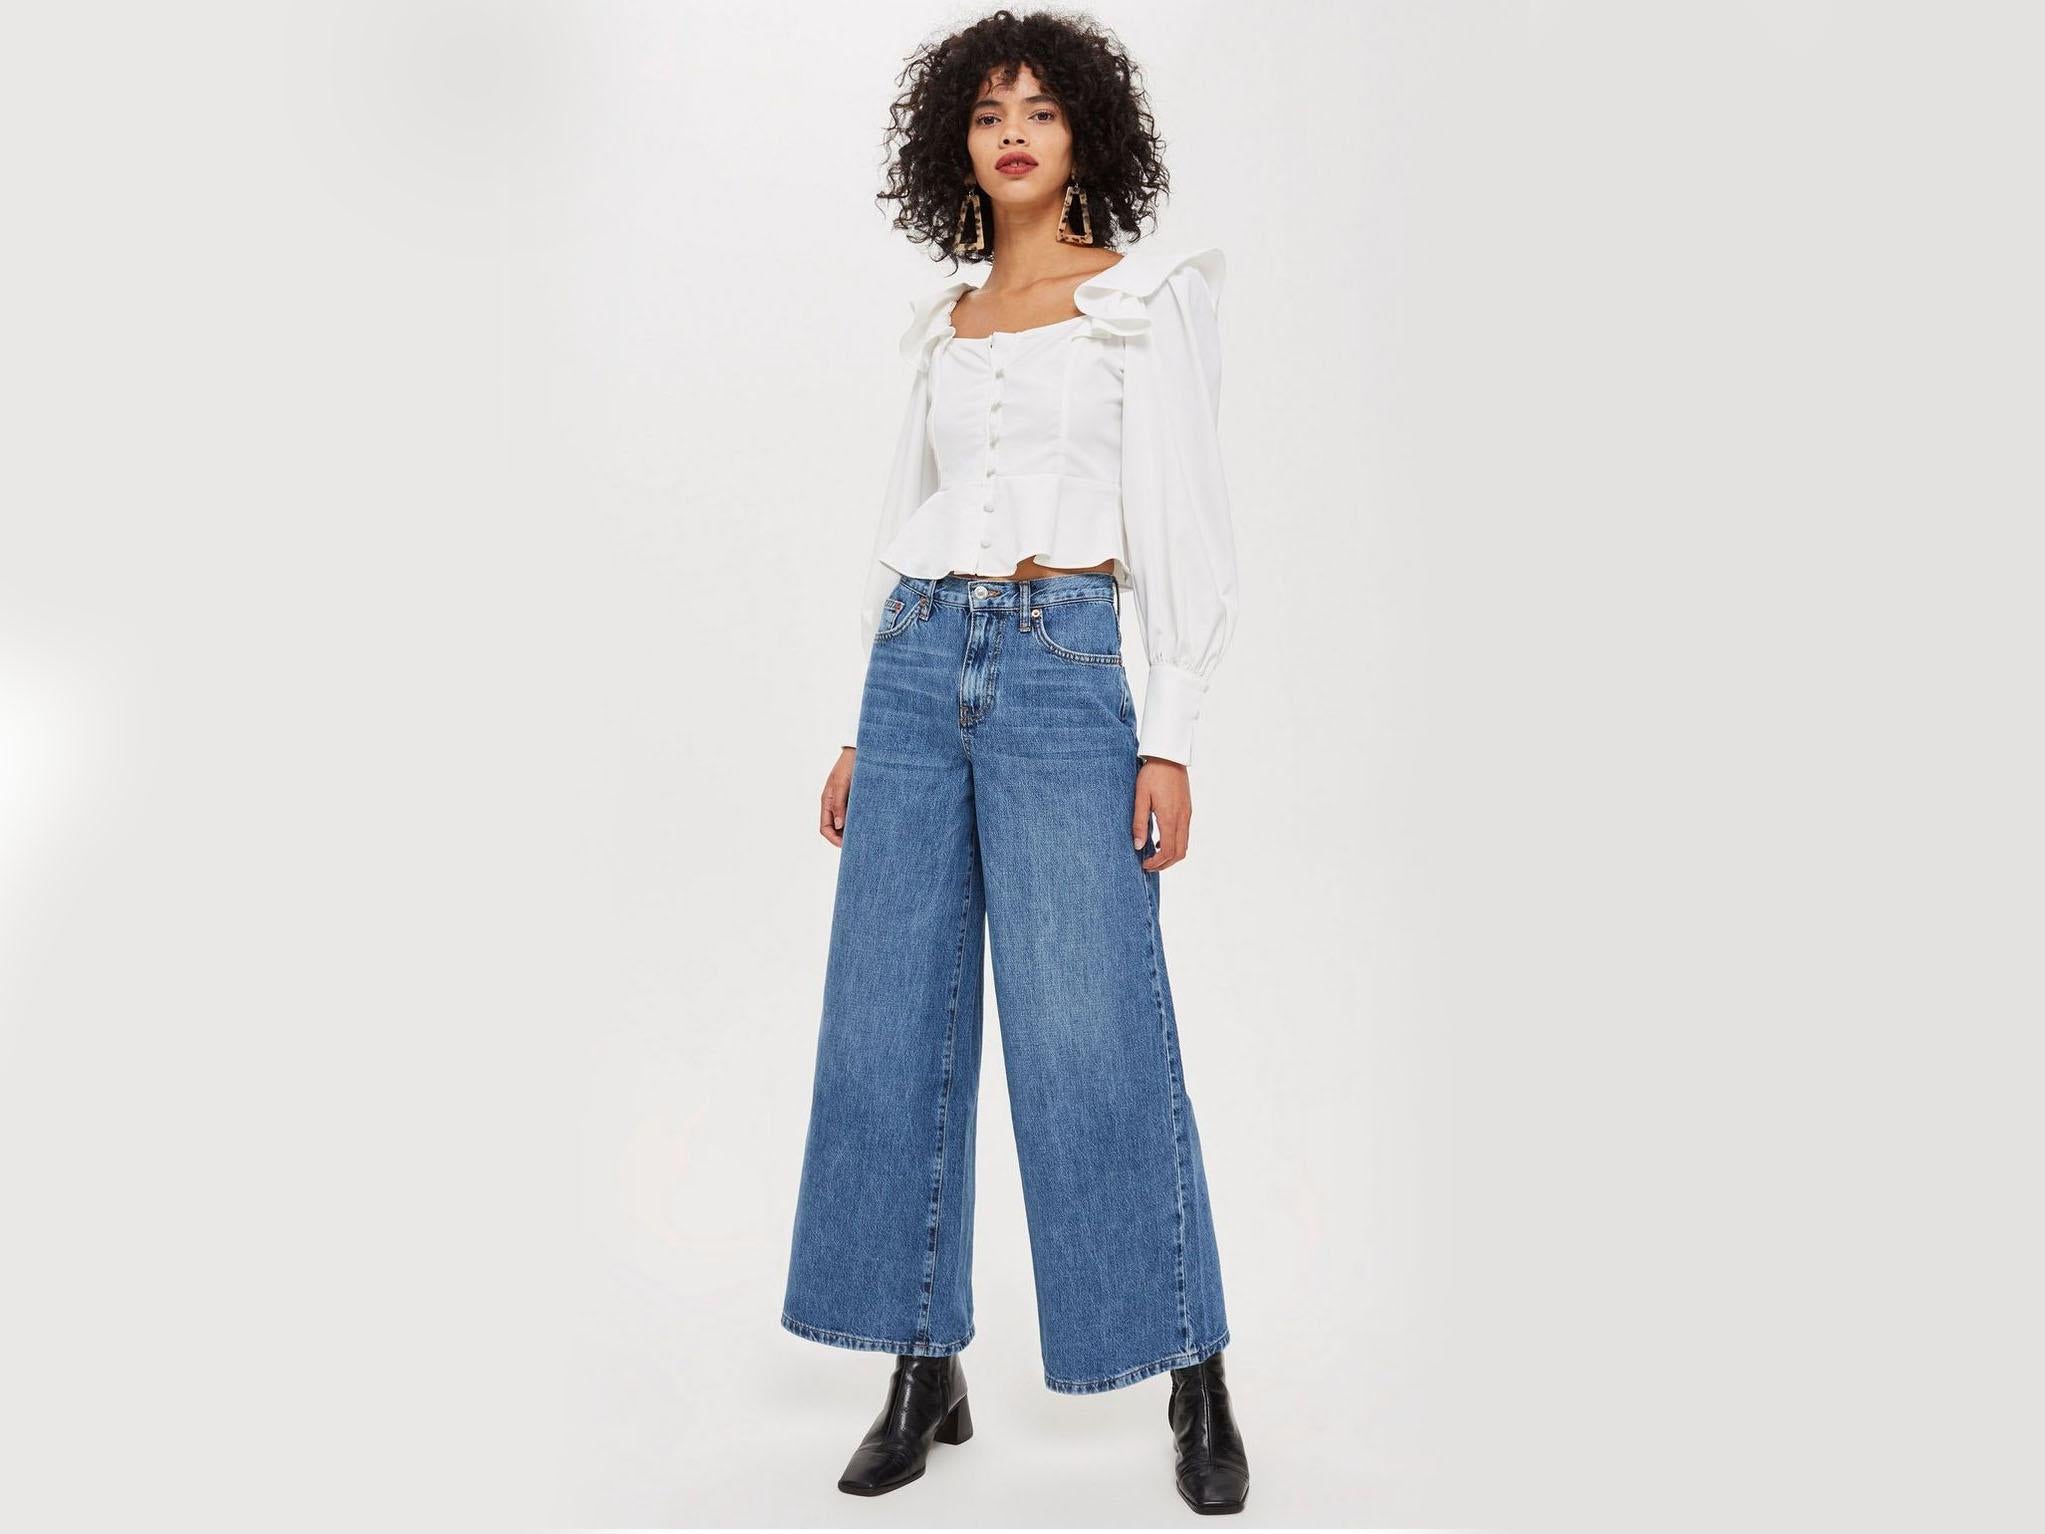 How to wear wide-leg jeans | The Independent | The Independent